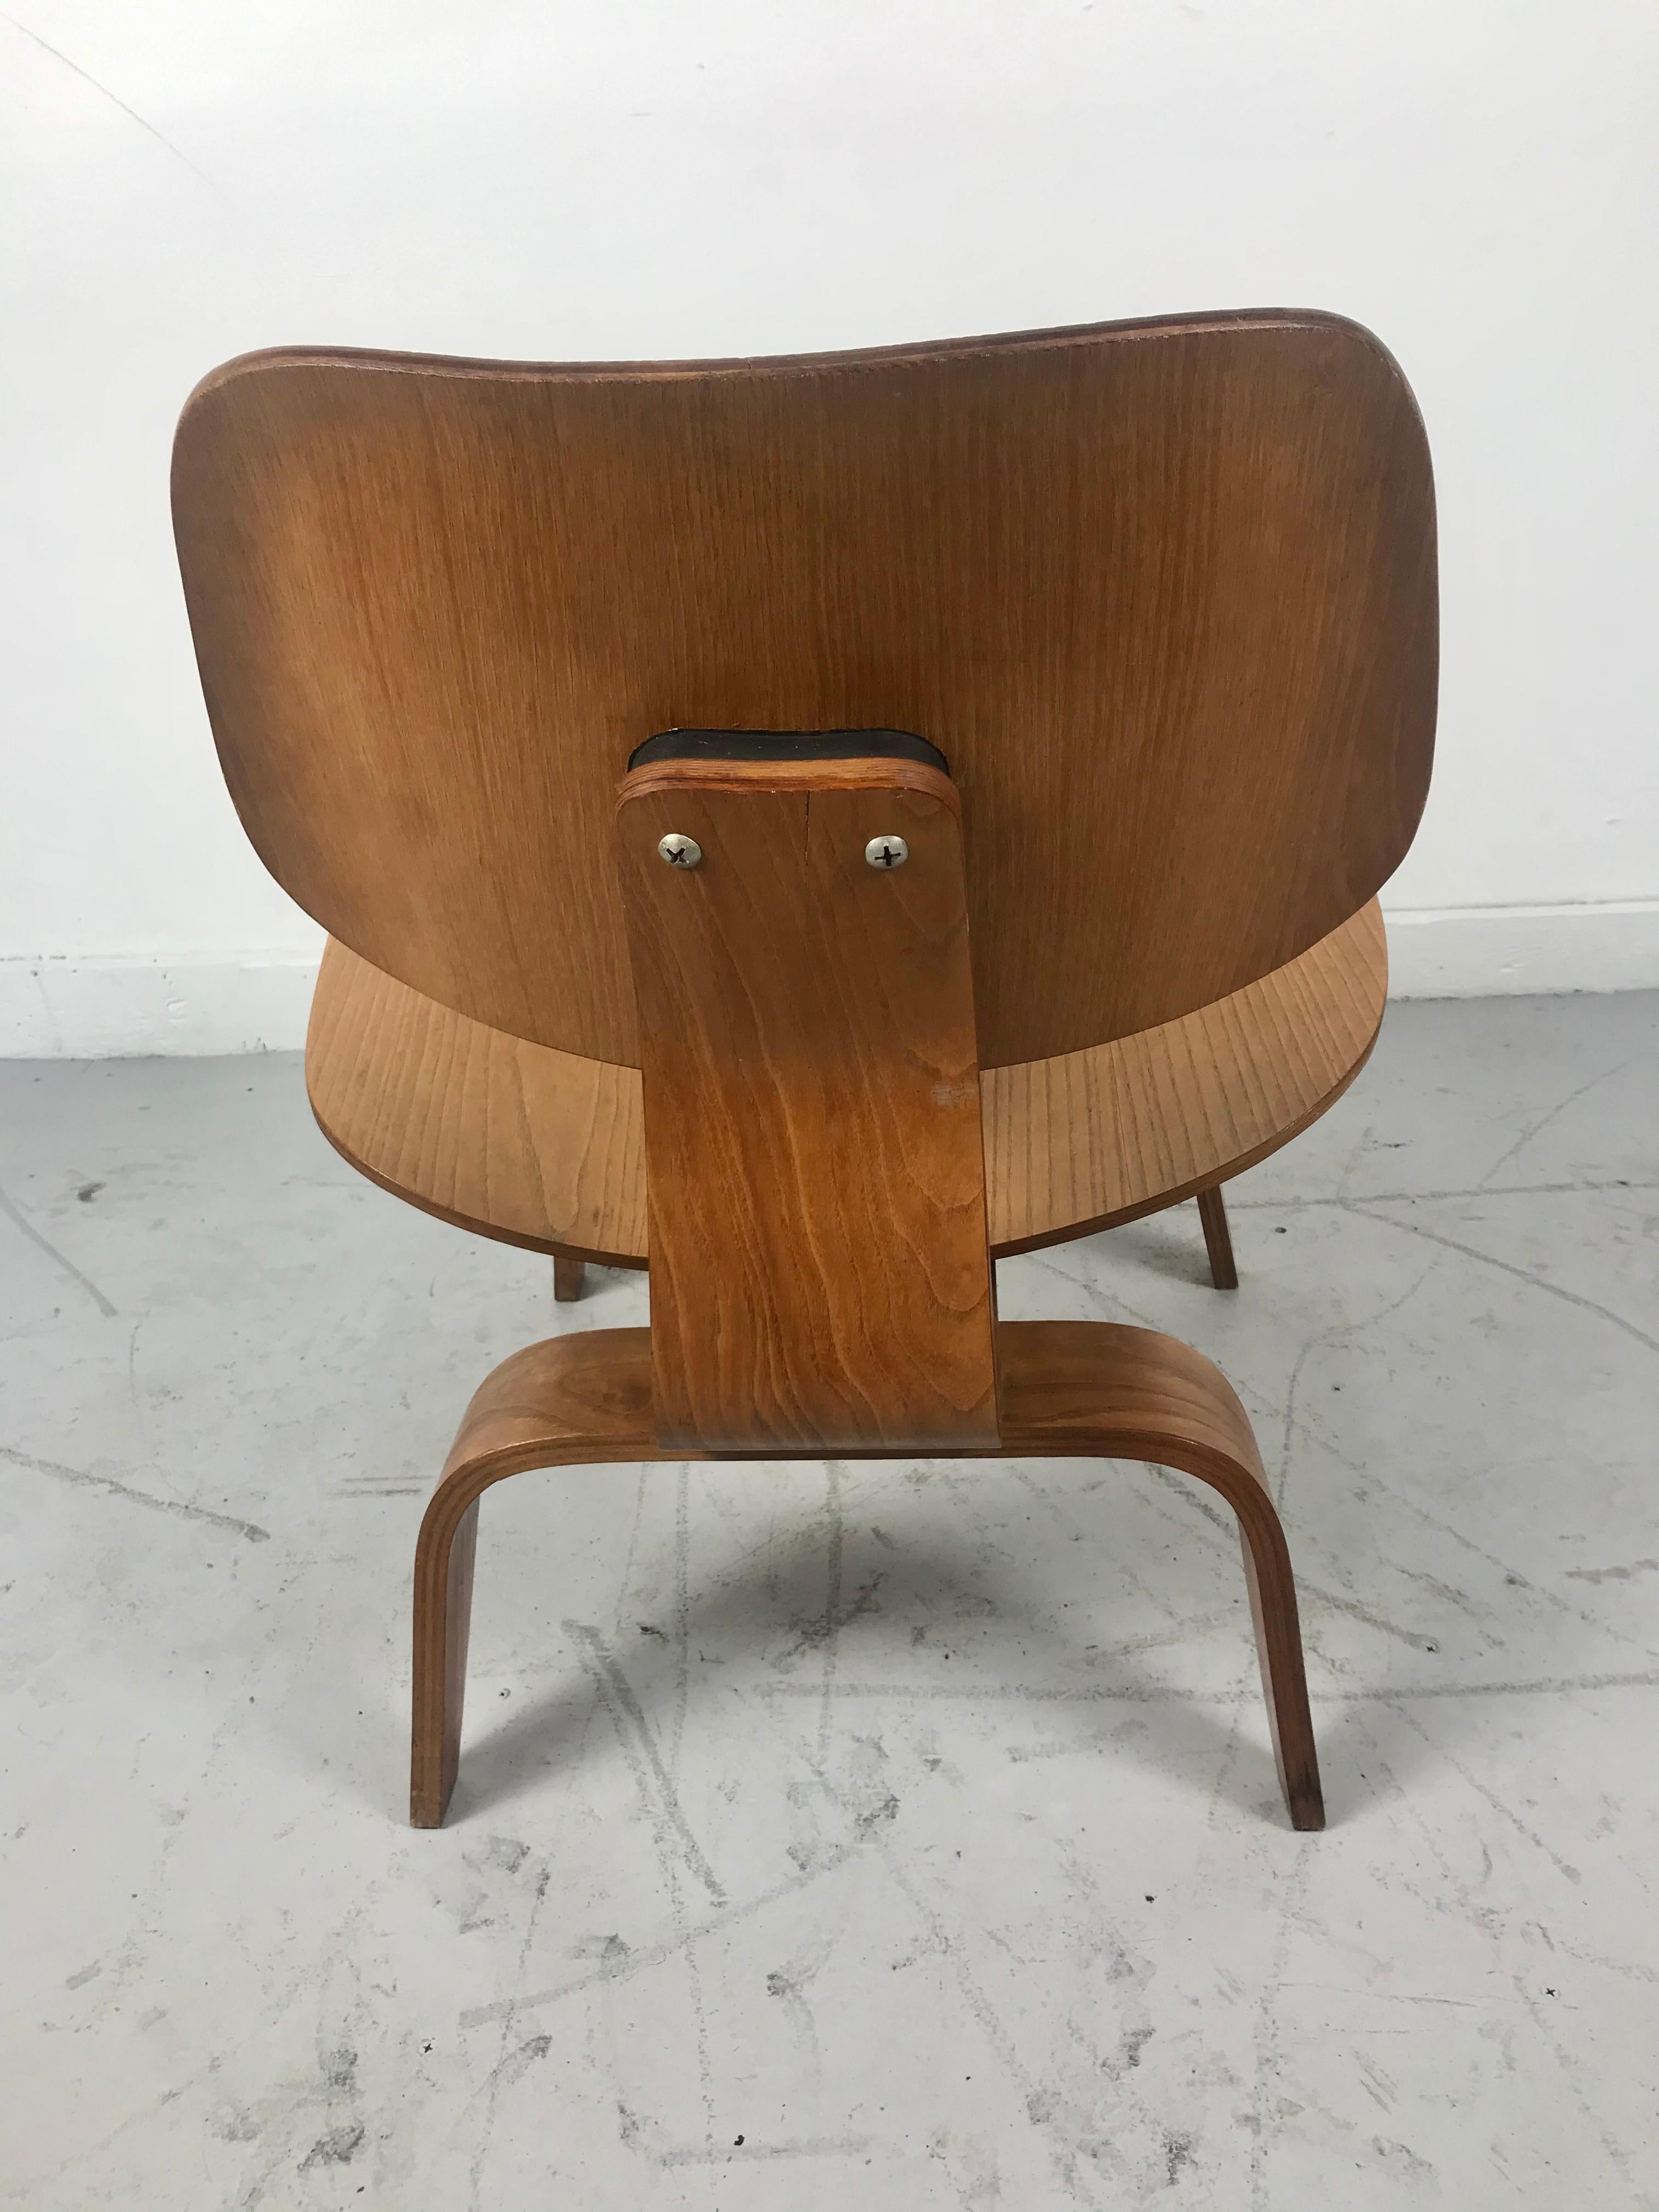 Birch Classic First Year Production Eames LCW, Evans Label 5 2 5 Screw Configuration For Sale